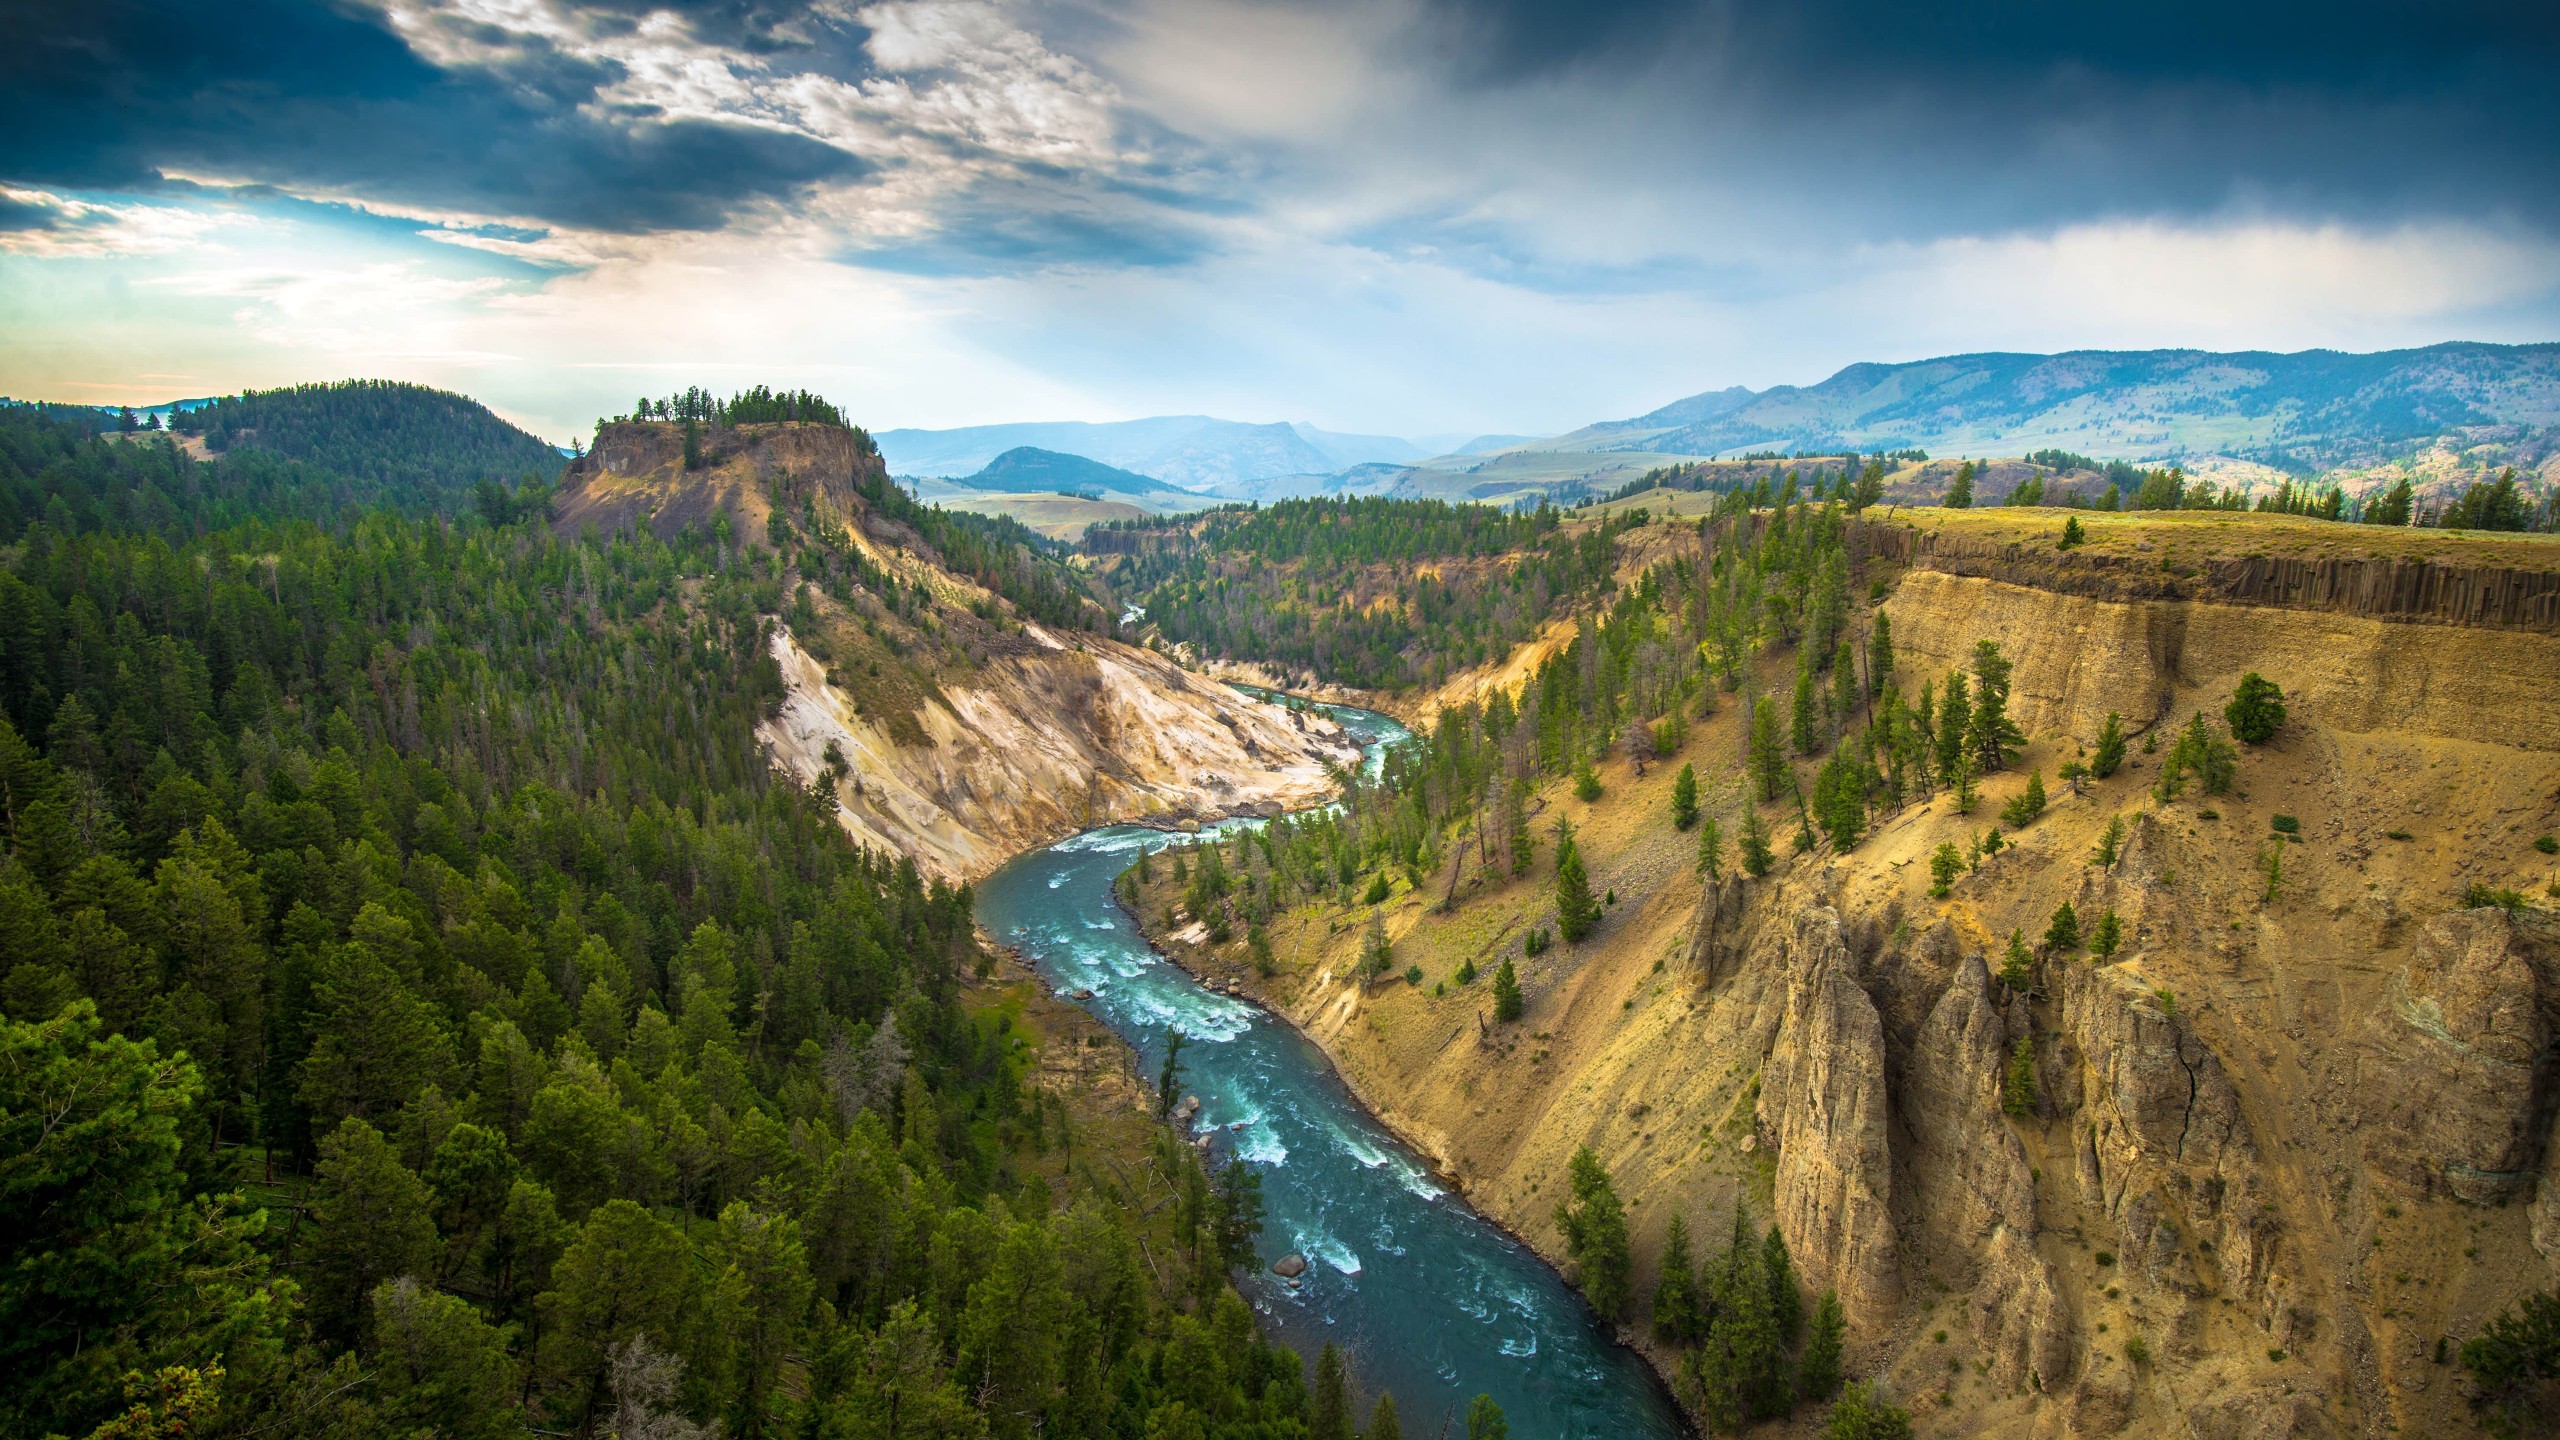 The River, Grand Canyon of Yellowstone National Park, USA Wallpaper for Desktop 2560x1440